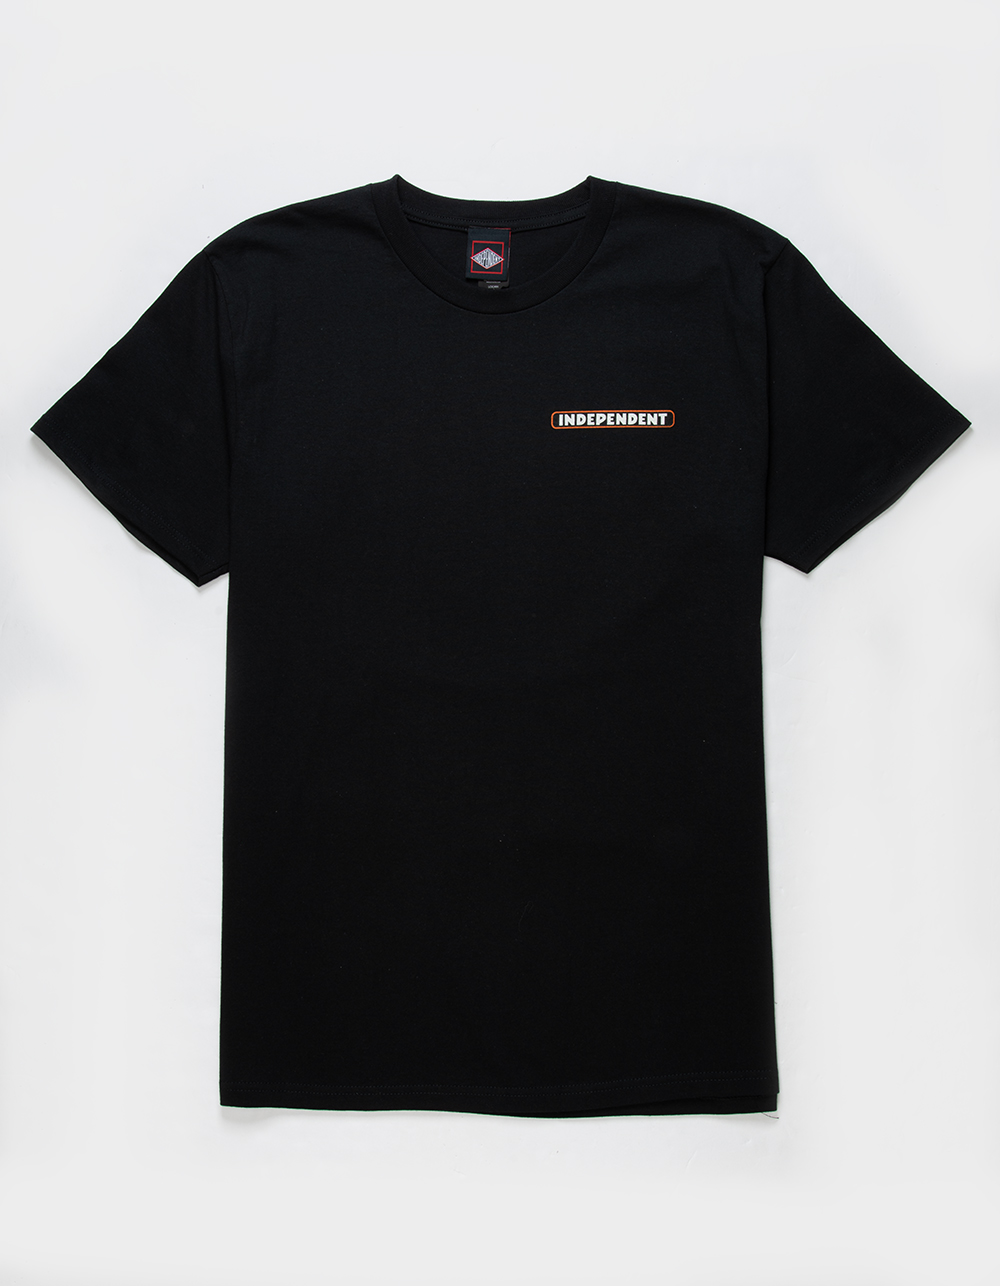 INDEPENDENT ITC Profile Mens Tee - BLACK | Tillys